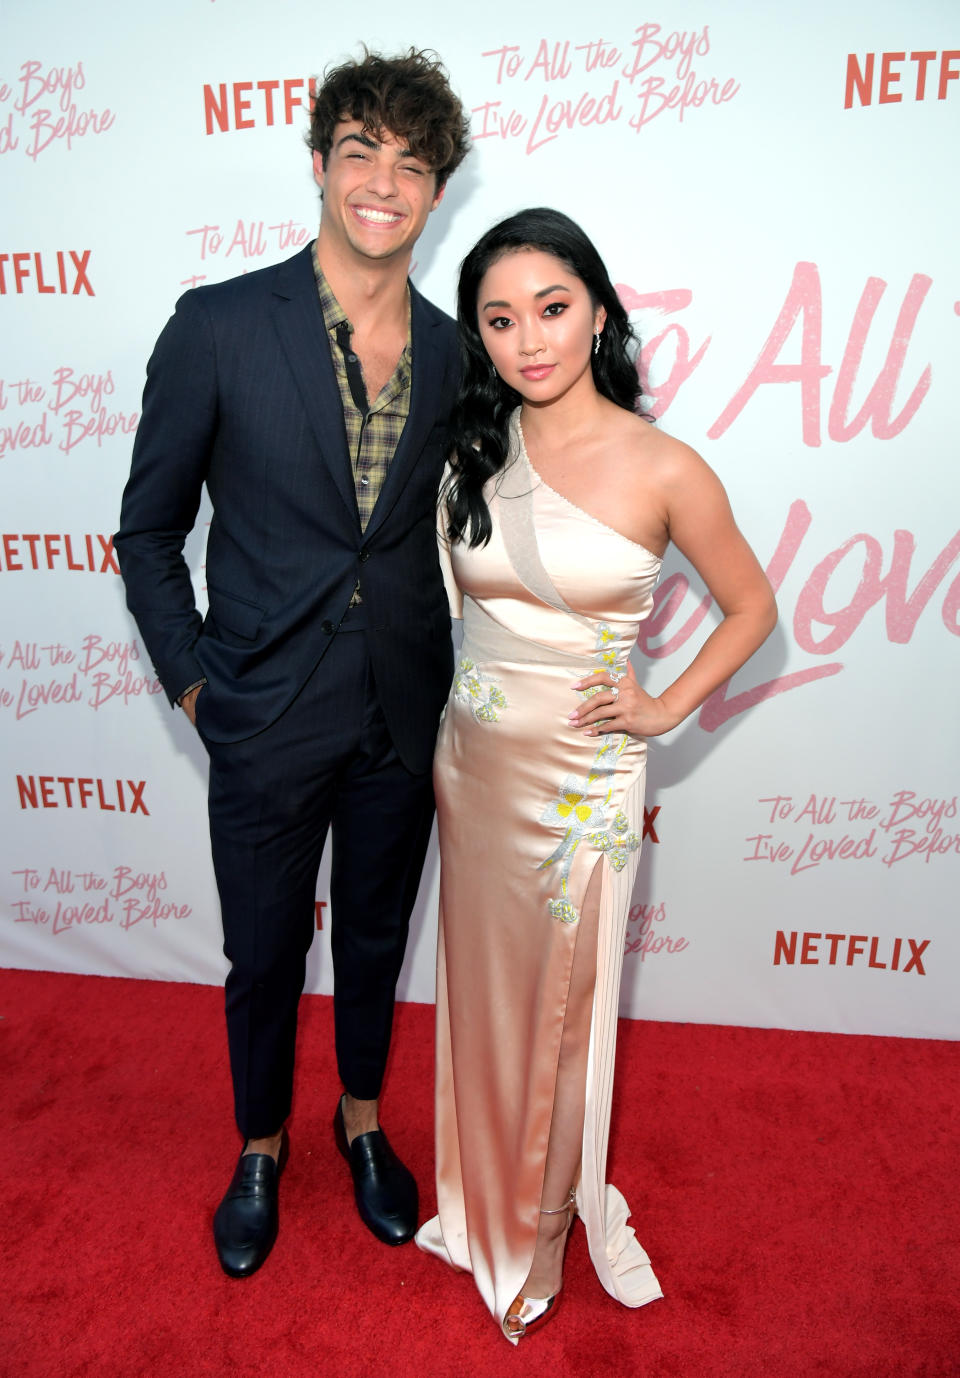 Condor with her “To All The Boys I’ve Loved Before” co-star Noah Centineo. (Image via Getty Images)